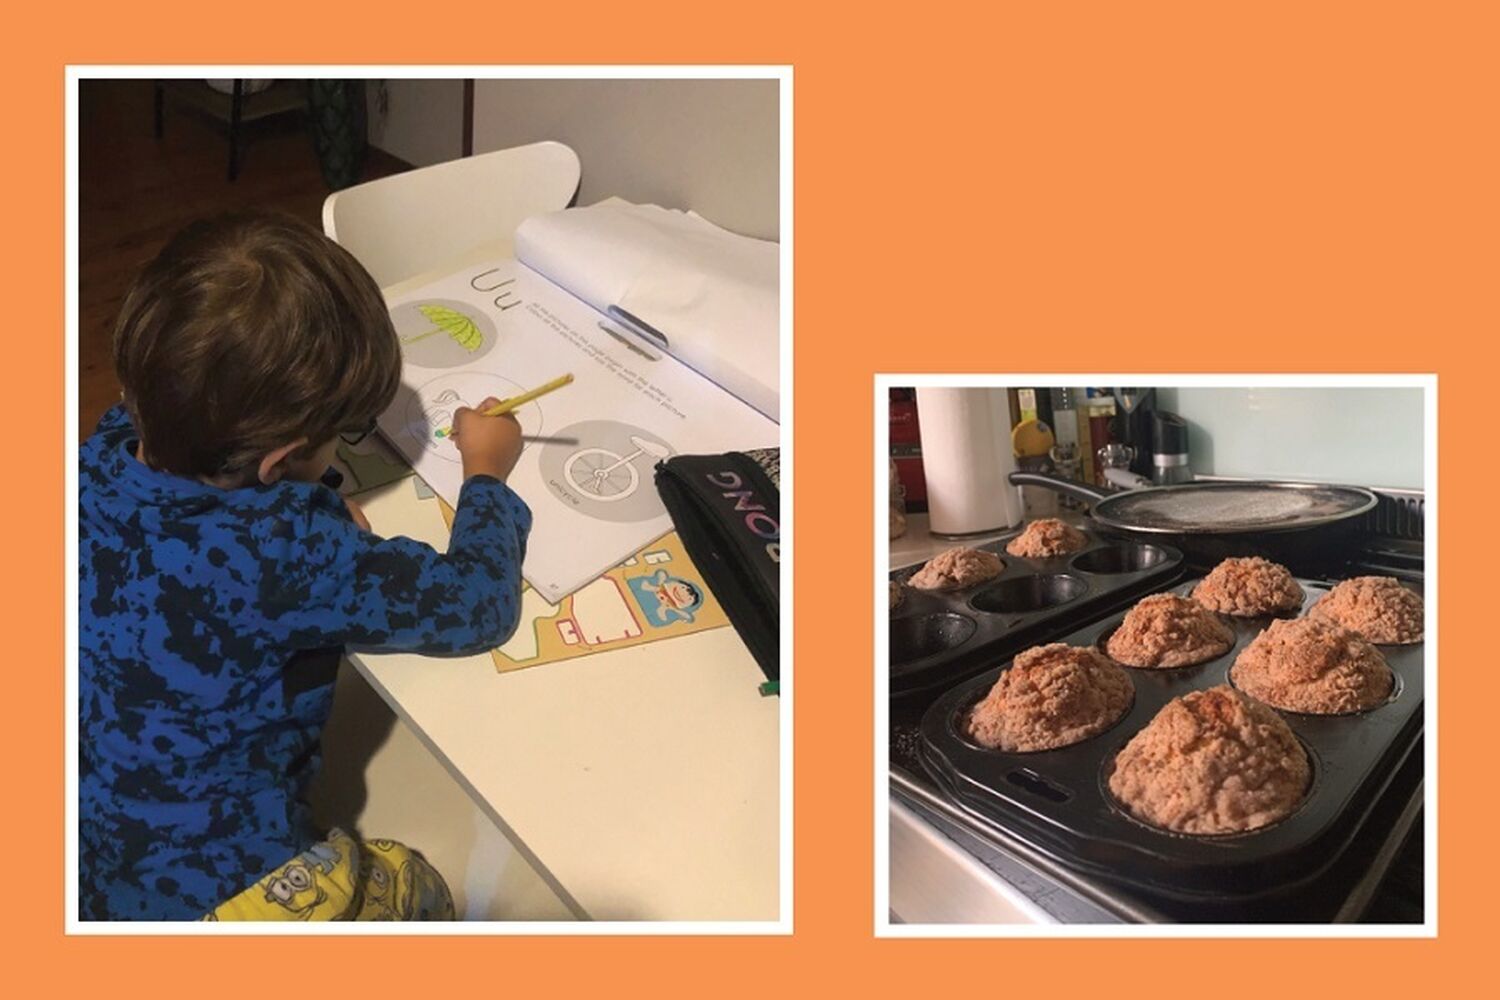 Covid Challenge Boy Drawing And Cooking Muffins